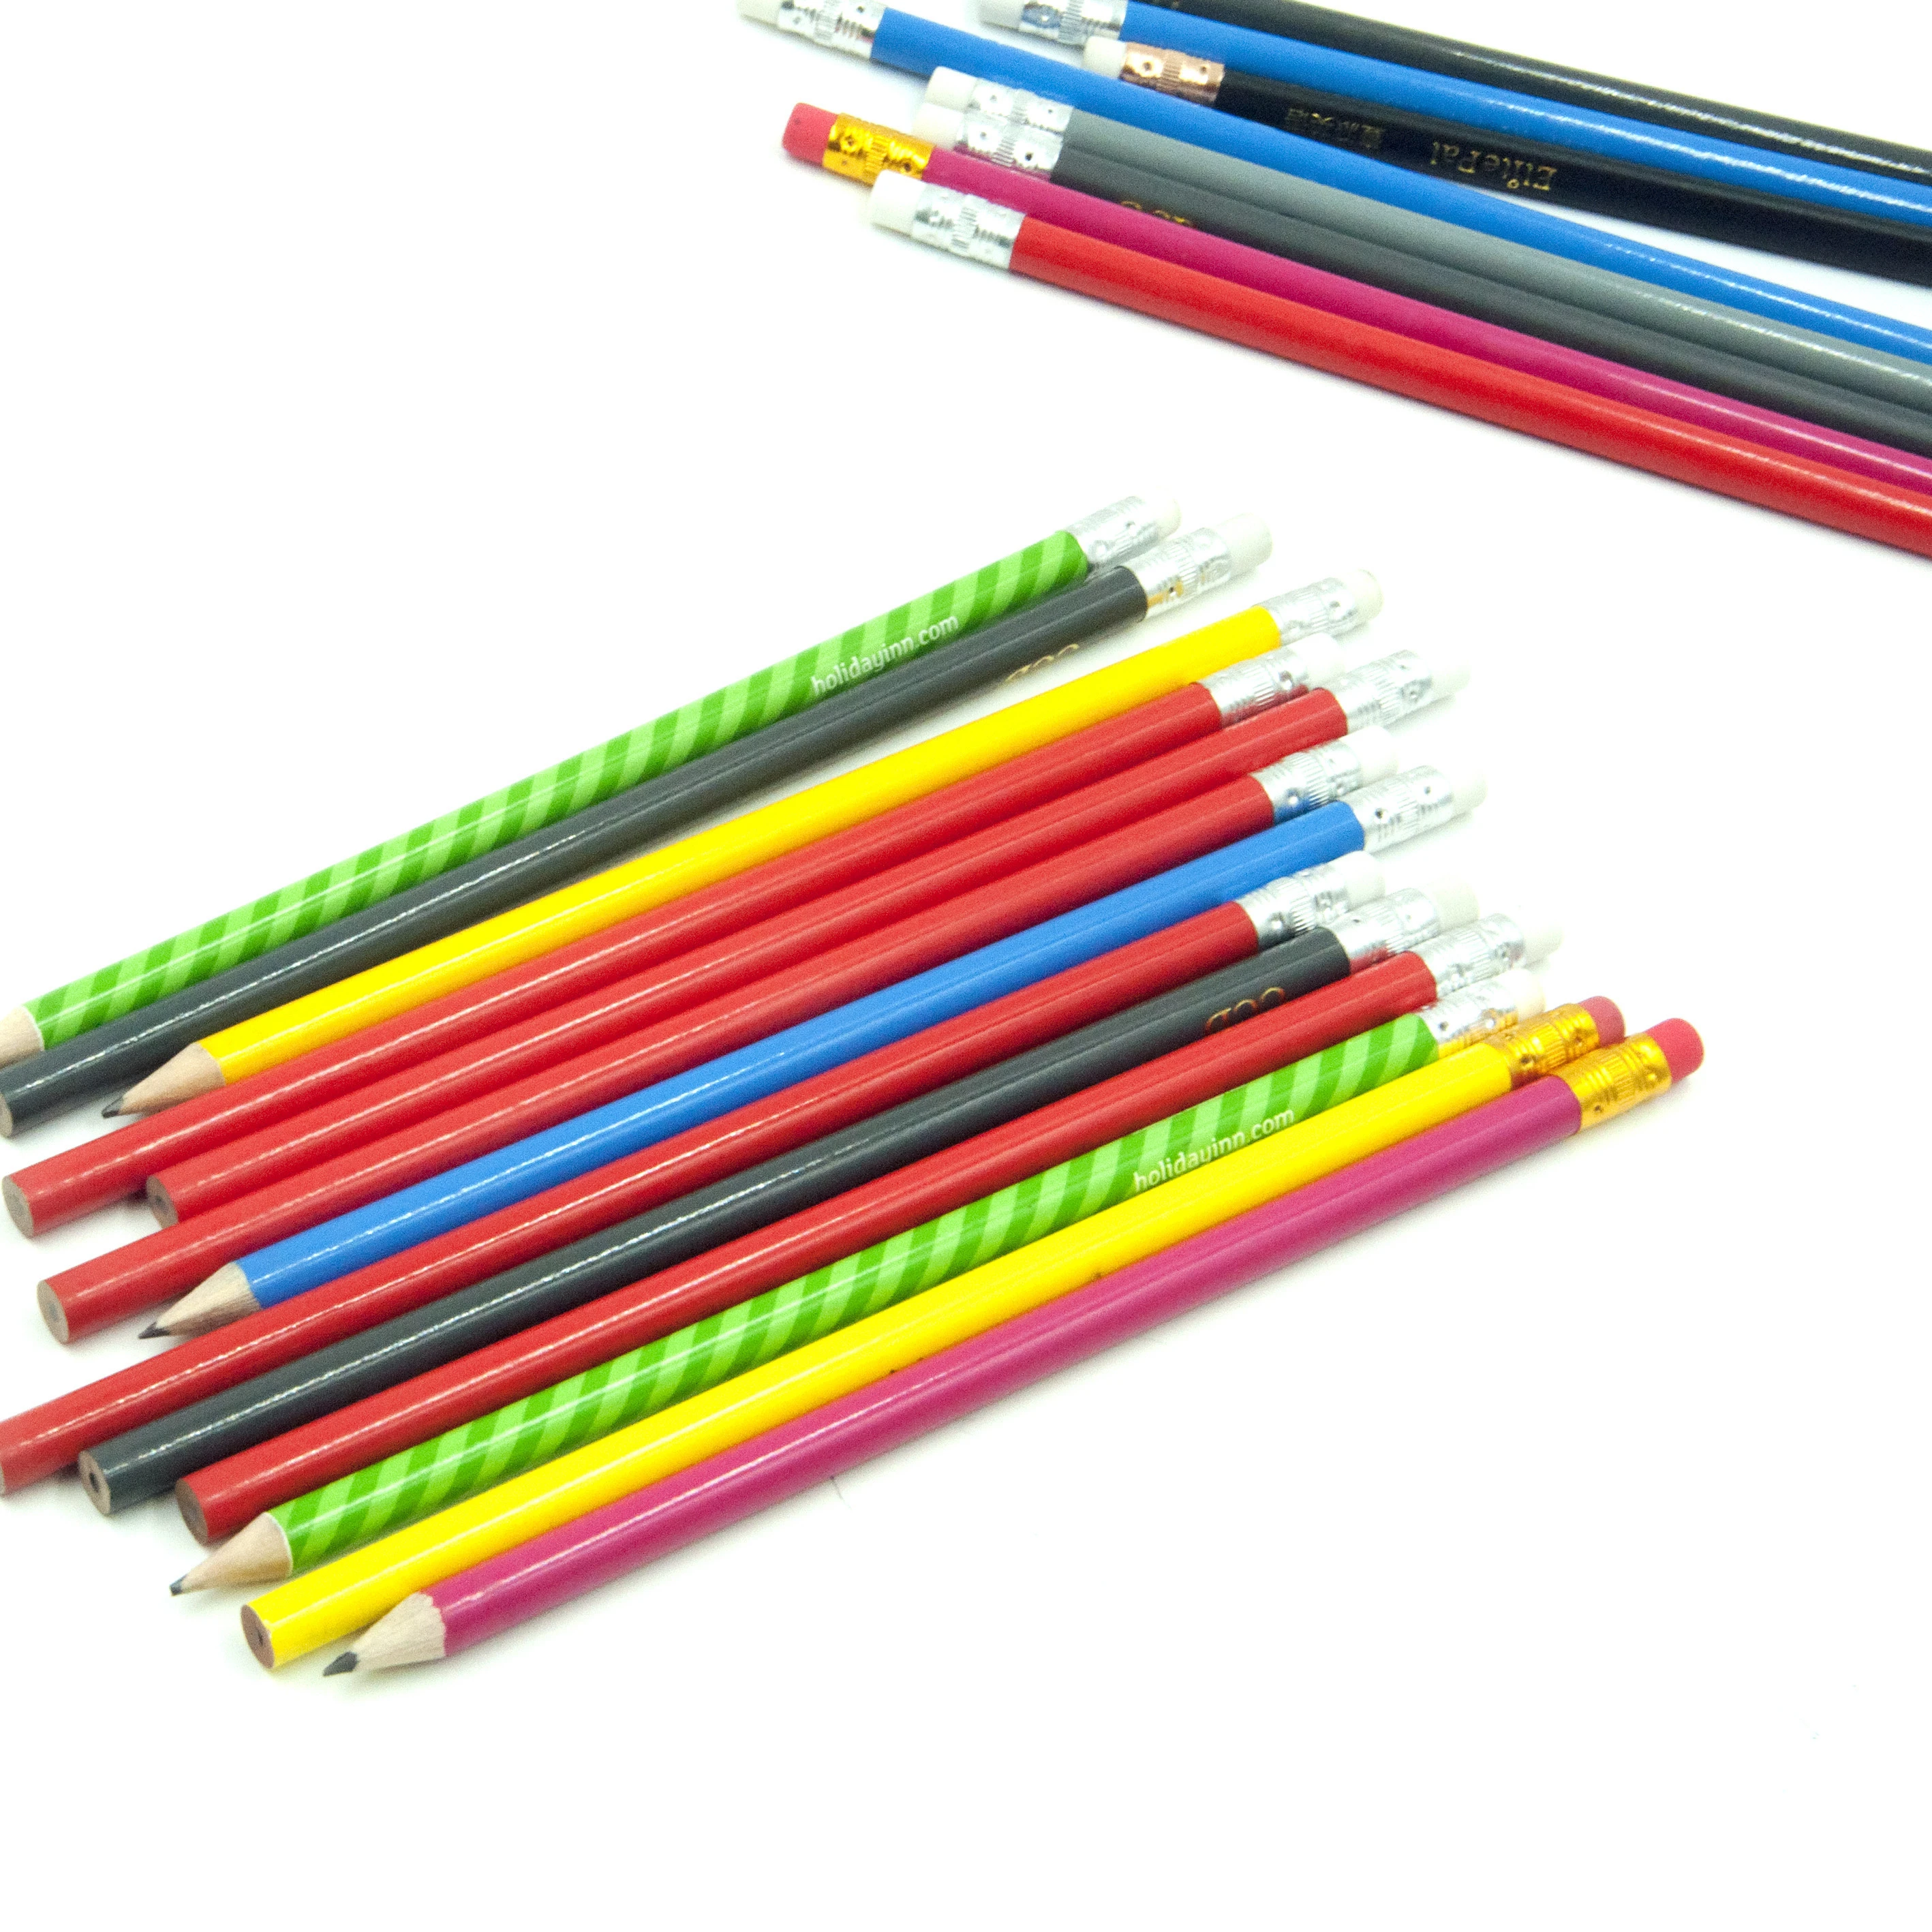 Top Quality Wooden Customized 2B HB Pencil With Eraser